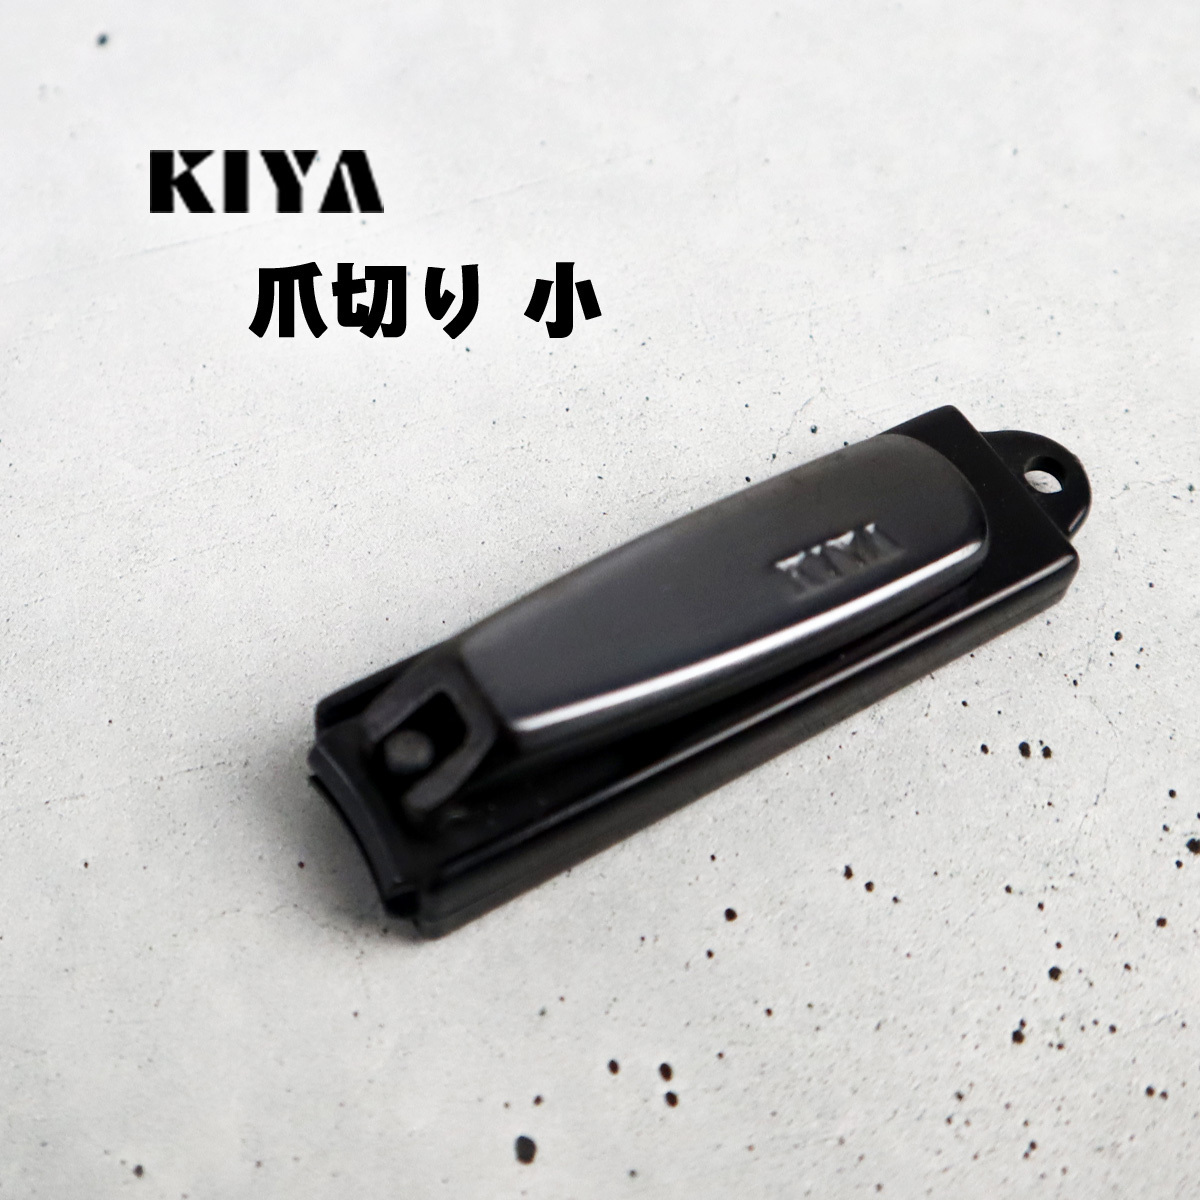  tree shop nail clippers small black .... mobile portable high class made in Japan steel made hand pair is .. black kiya nail care 